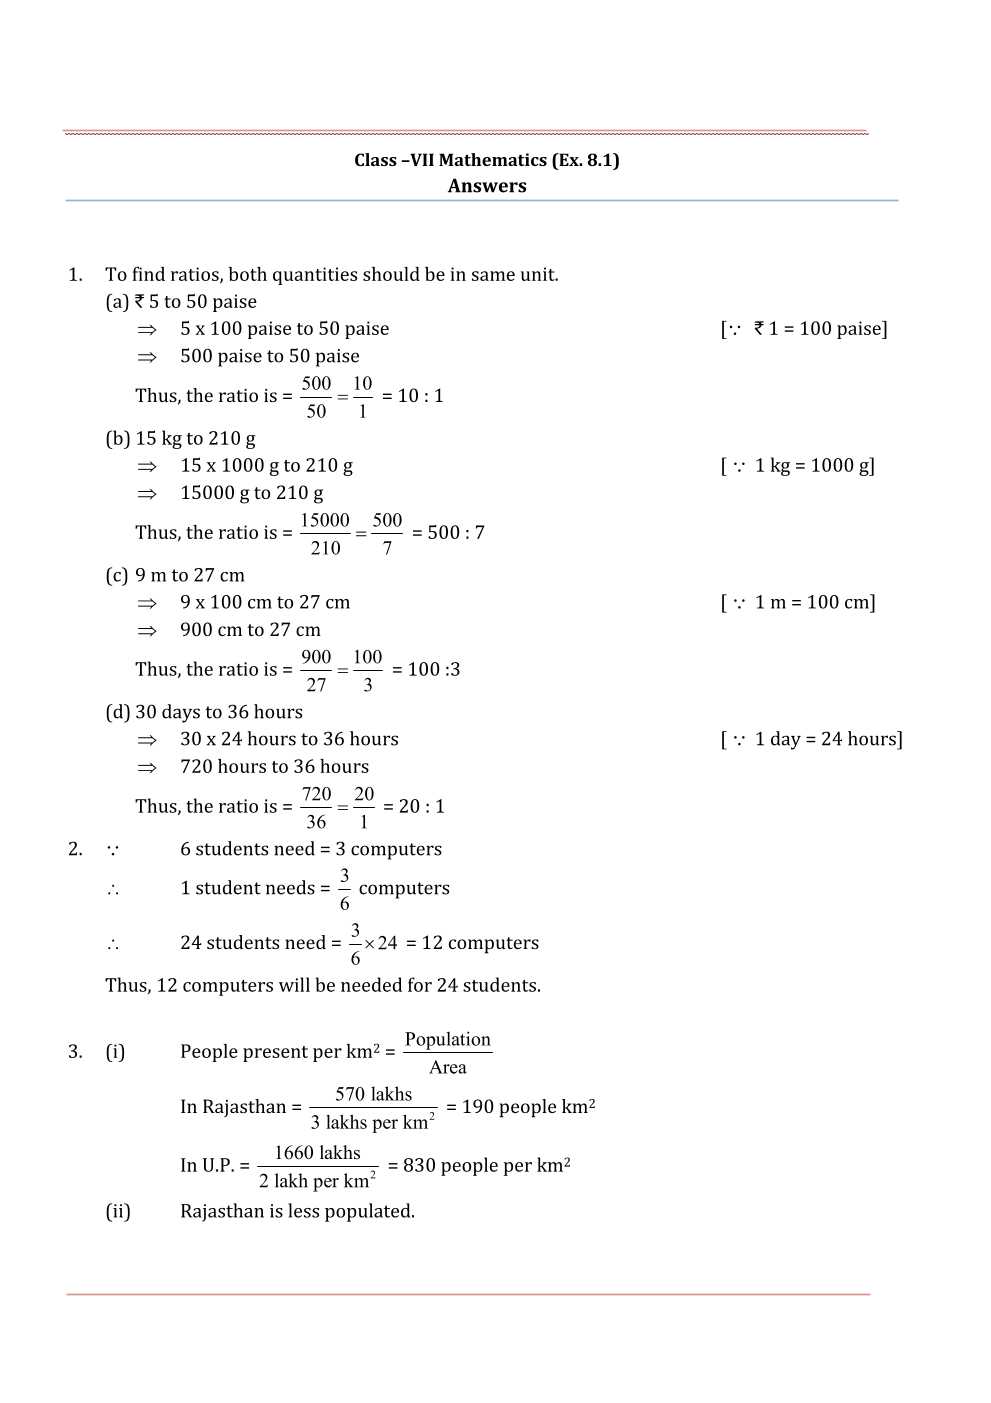 NCERT Solutions For Class 7 Maths Chapter 8 Comparing Quantities